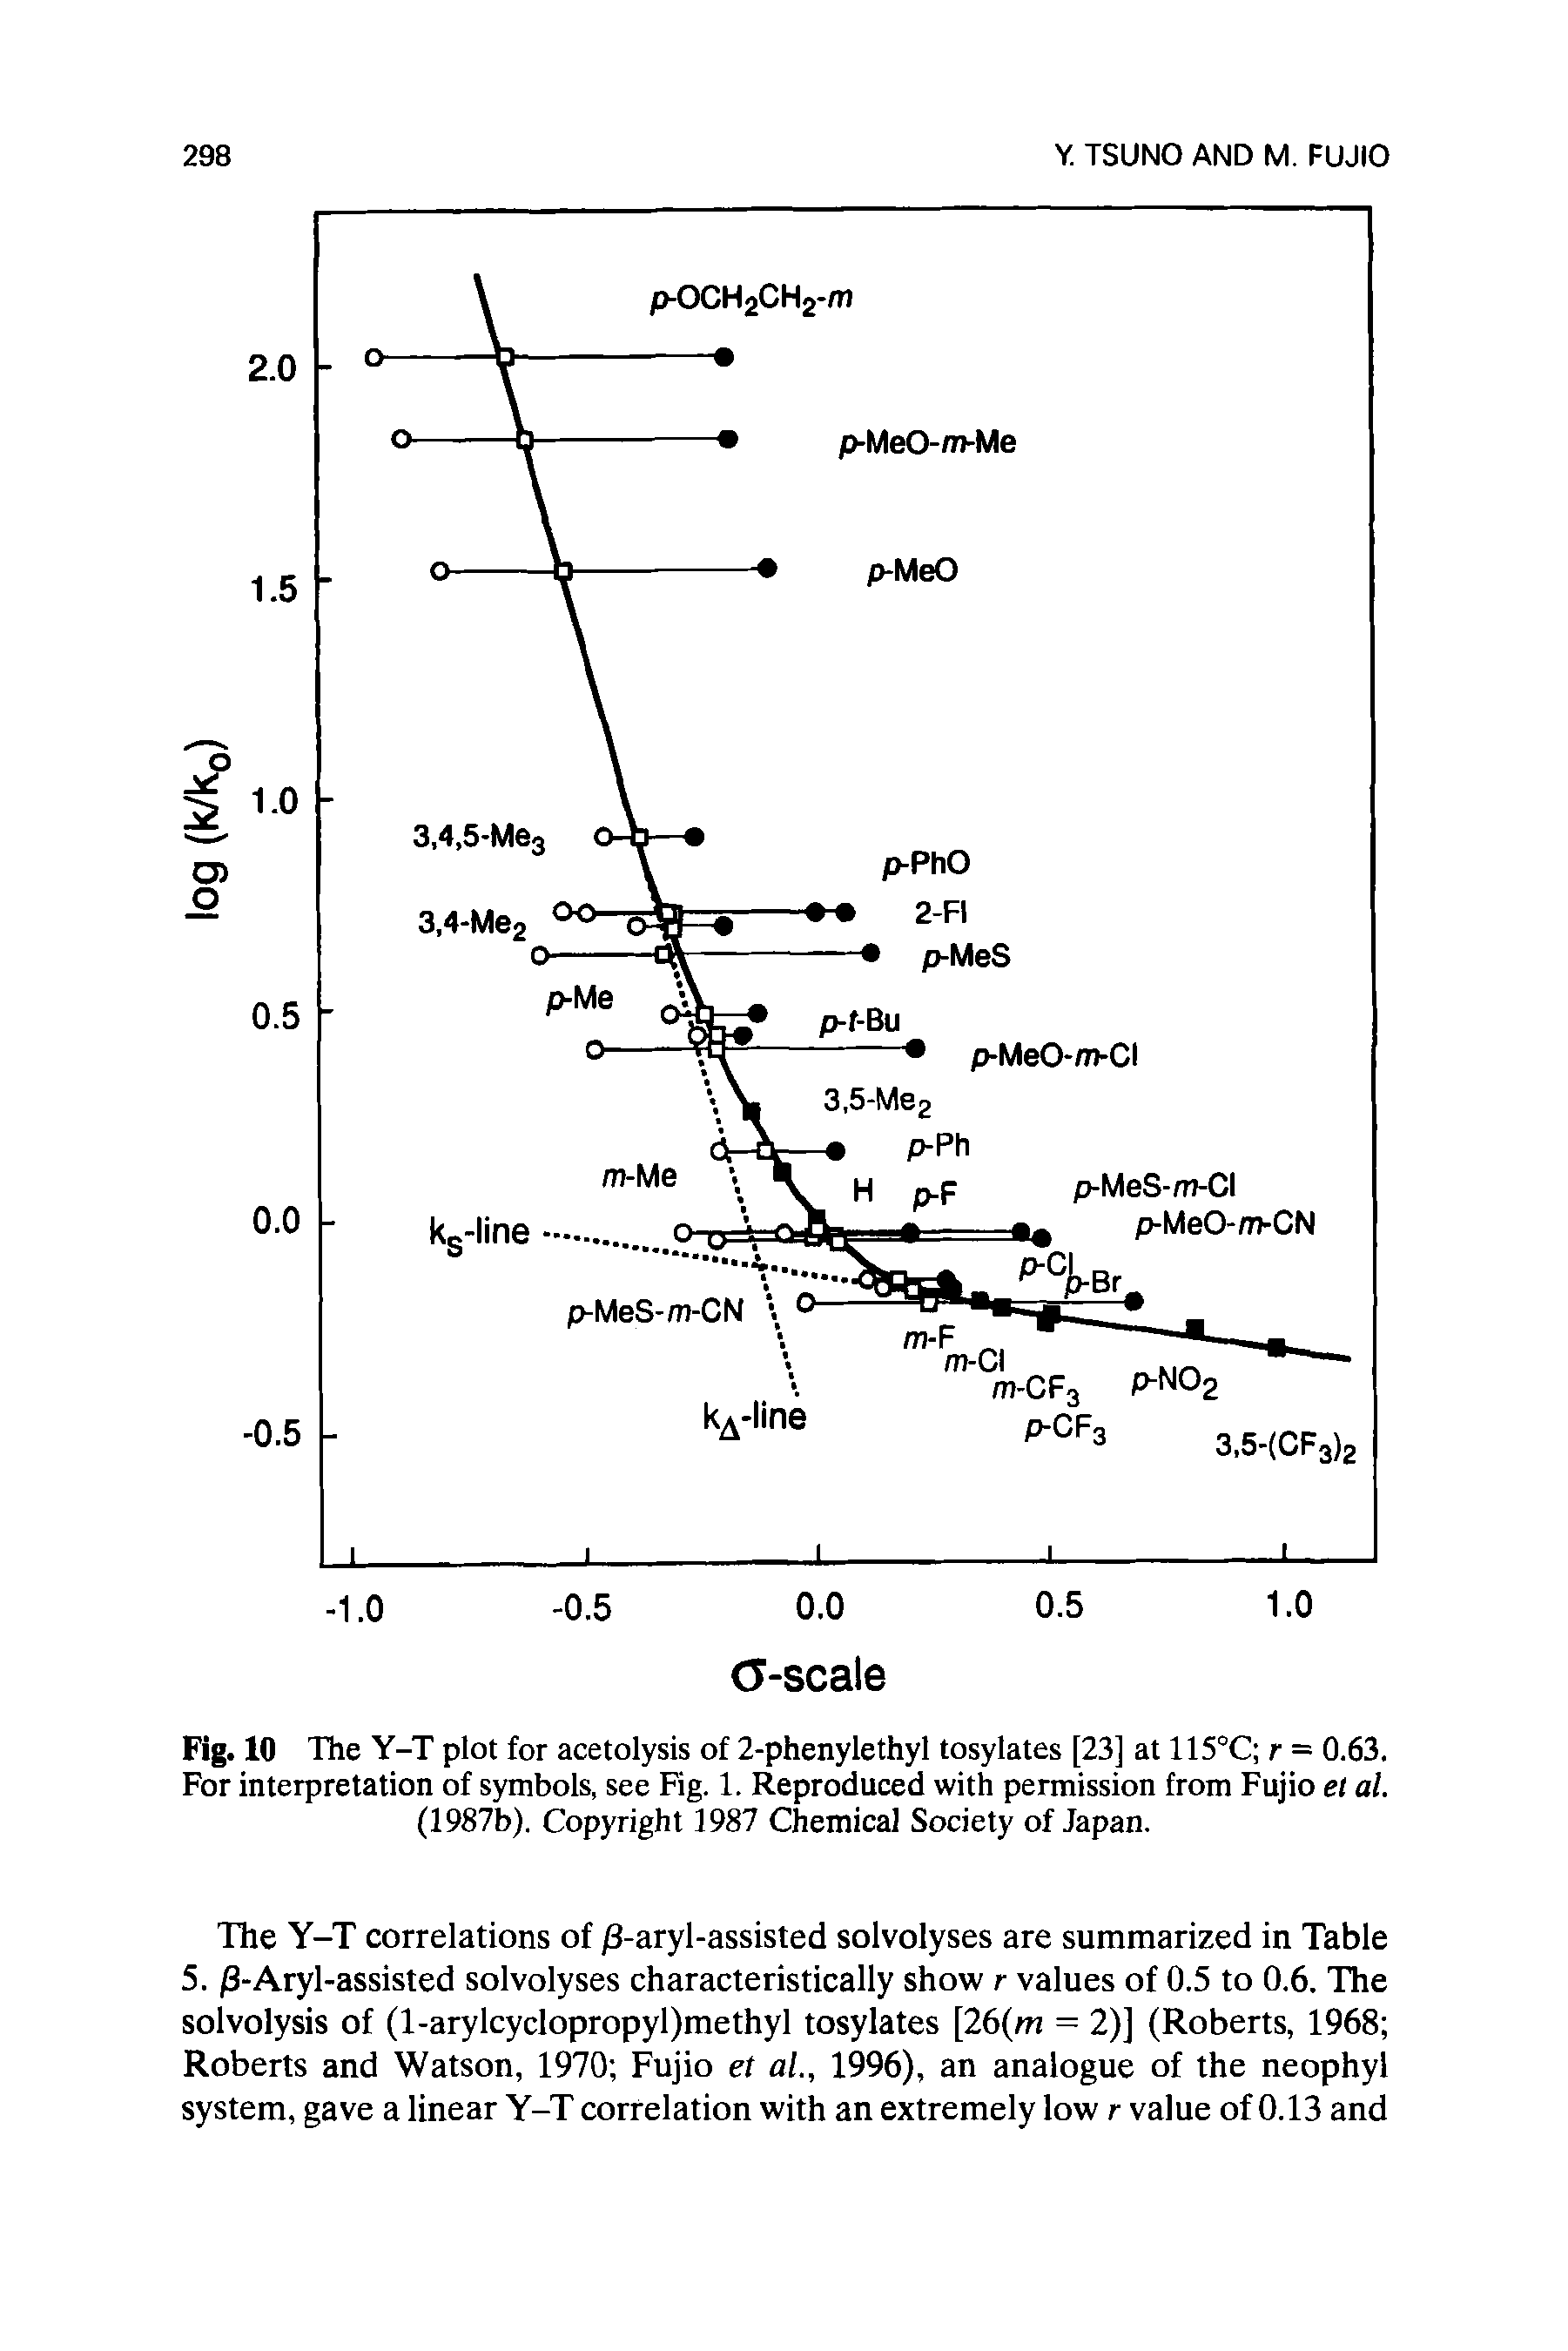 Fig. 10 The Y-T plot for acetolysis of 2-phenylethyl tosylates [23] at 115°C r = 0.63. For interpretation of symbols, see Fig. 1. Reproduced with permission from Fujio et al. (1987b). Copyright 1987 Chemical Society of Japan.